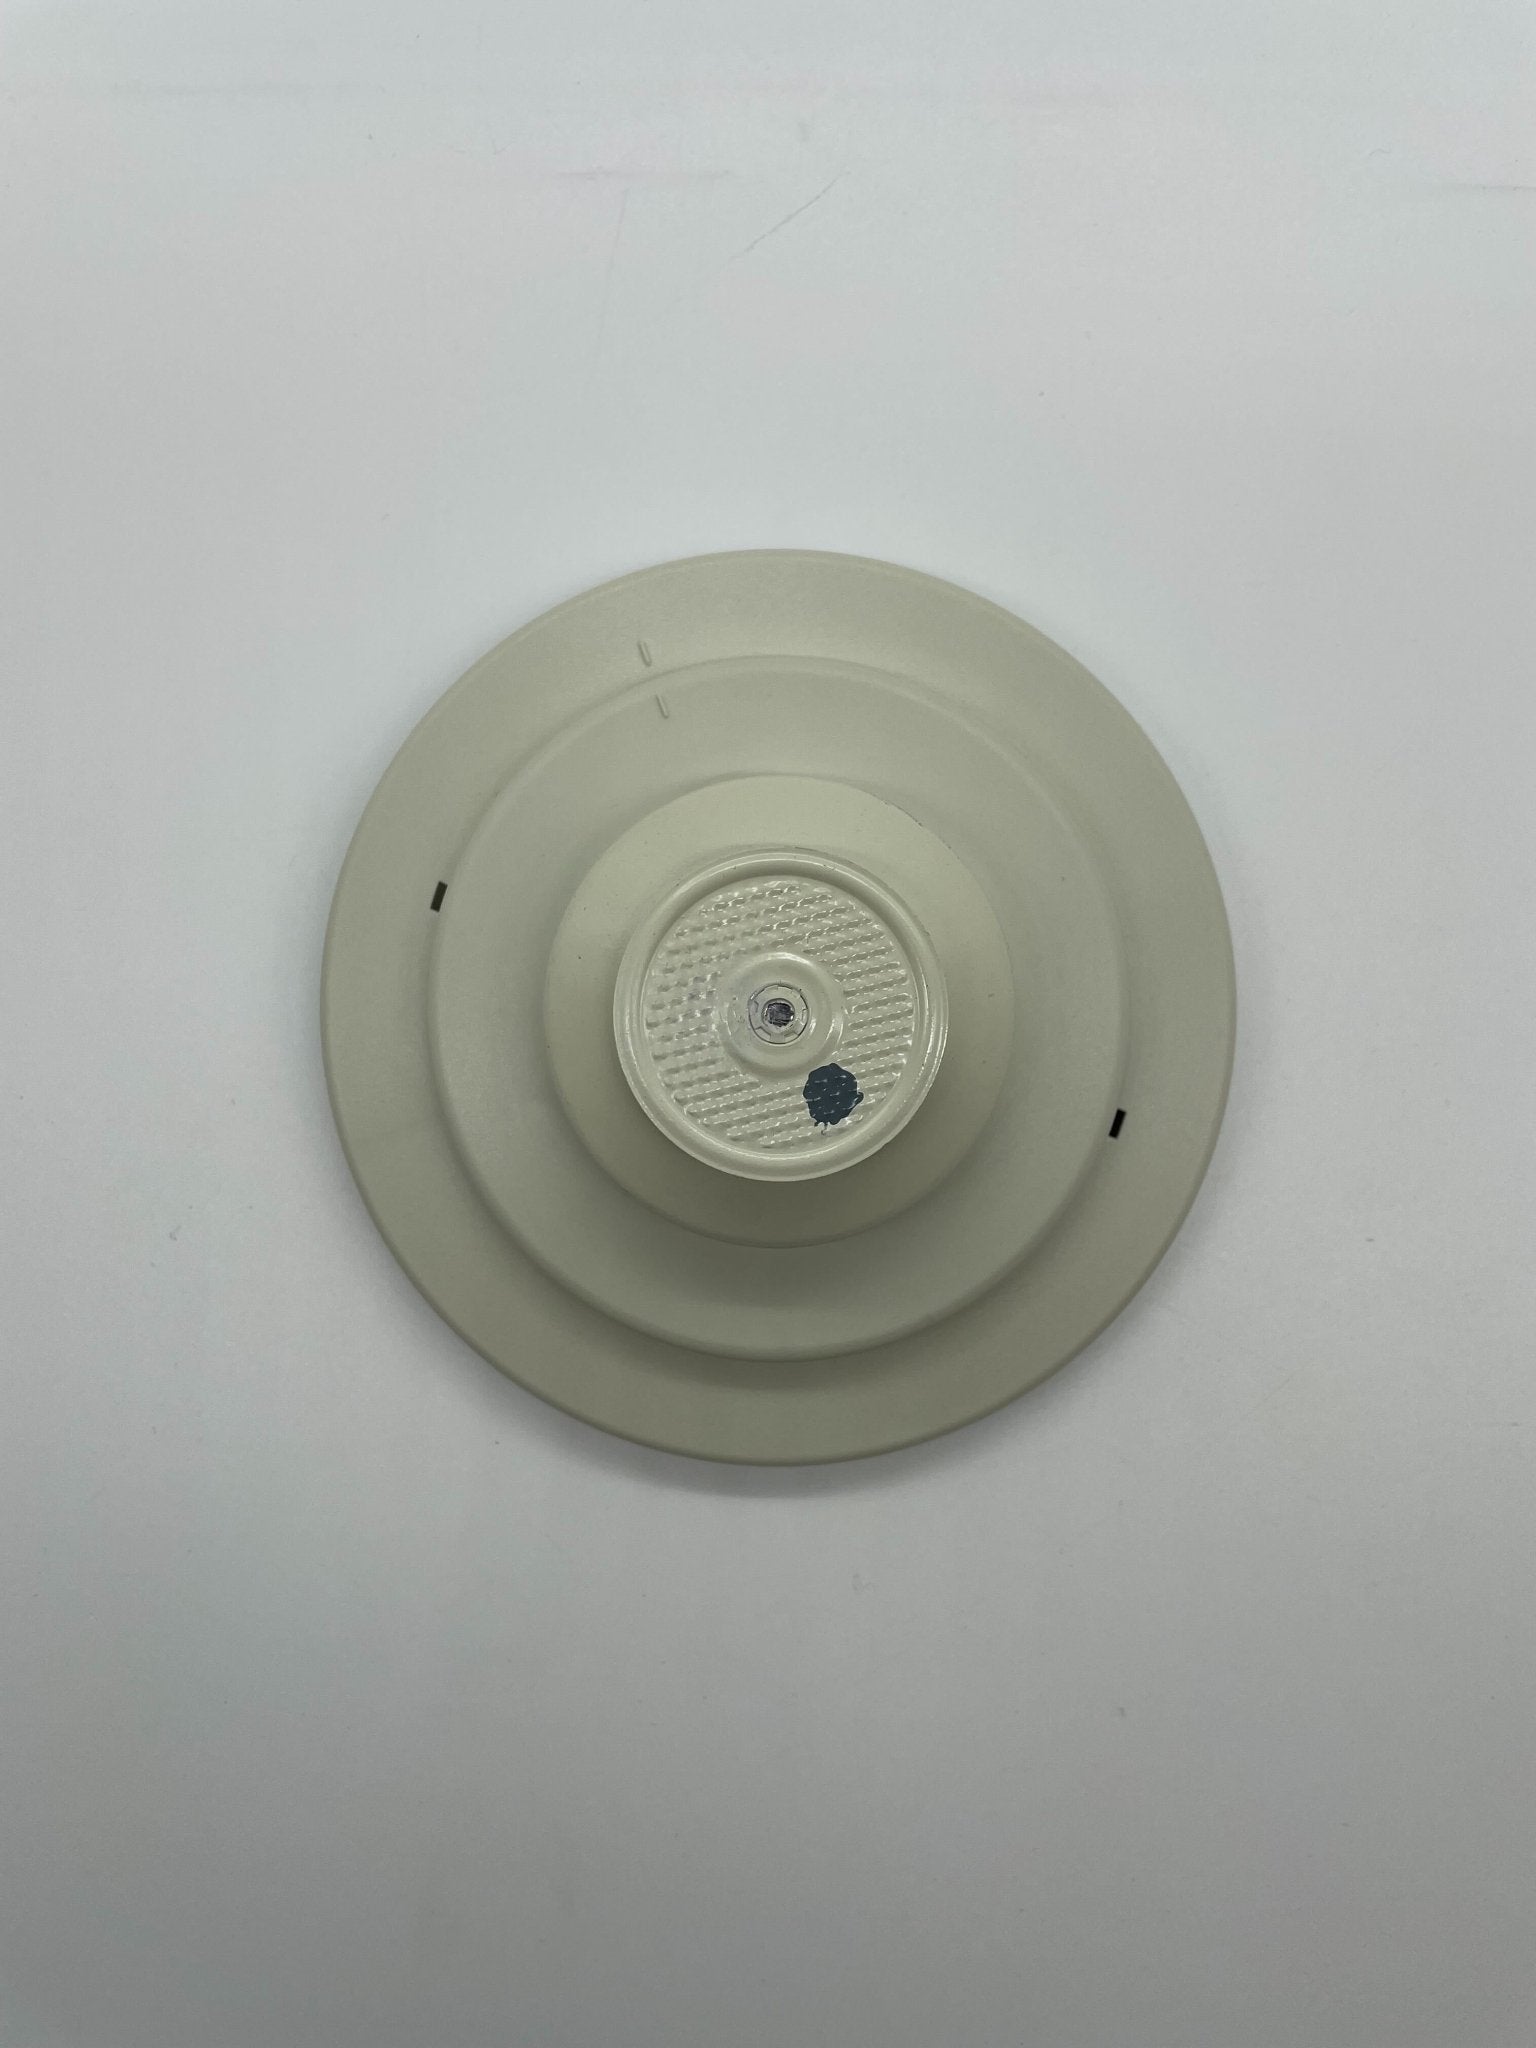 Potter CR-165W 165F Heat Detector - The Fire Alarm Supplier